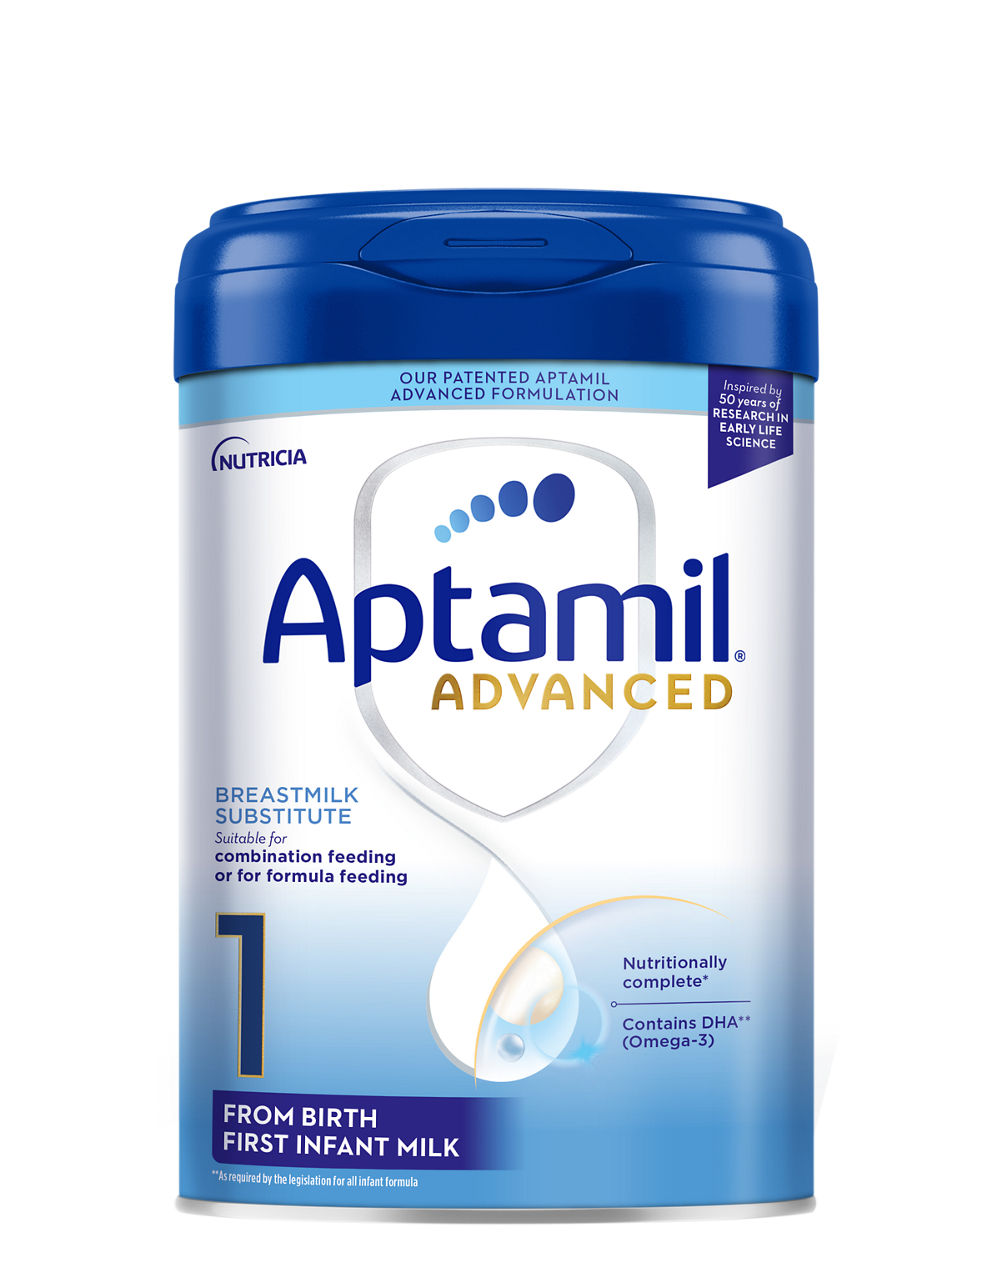 Aptamil gold vs Profutura baby formula: what's the difference